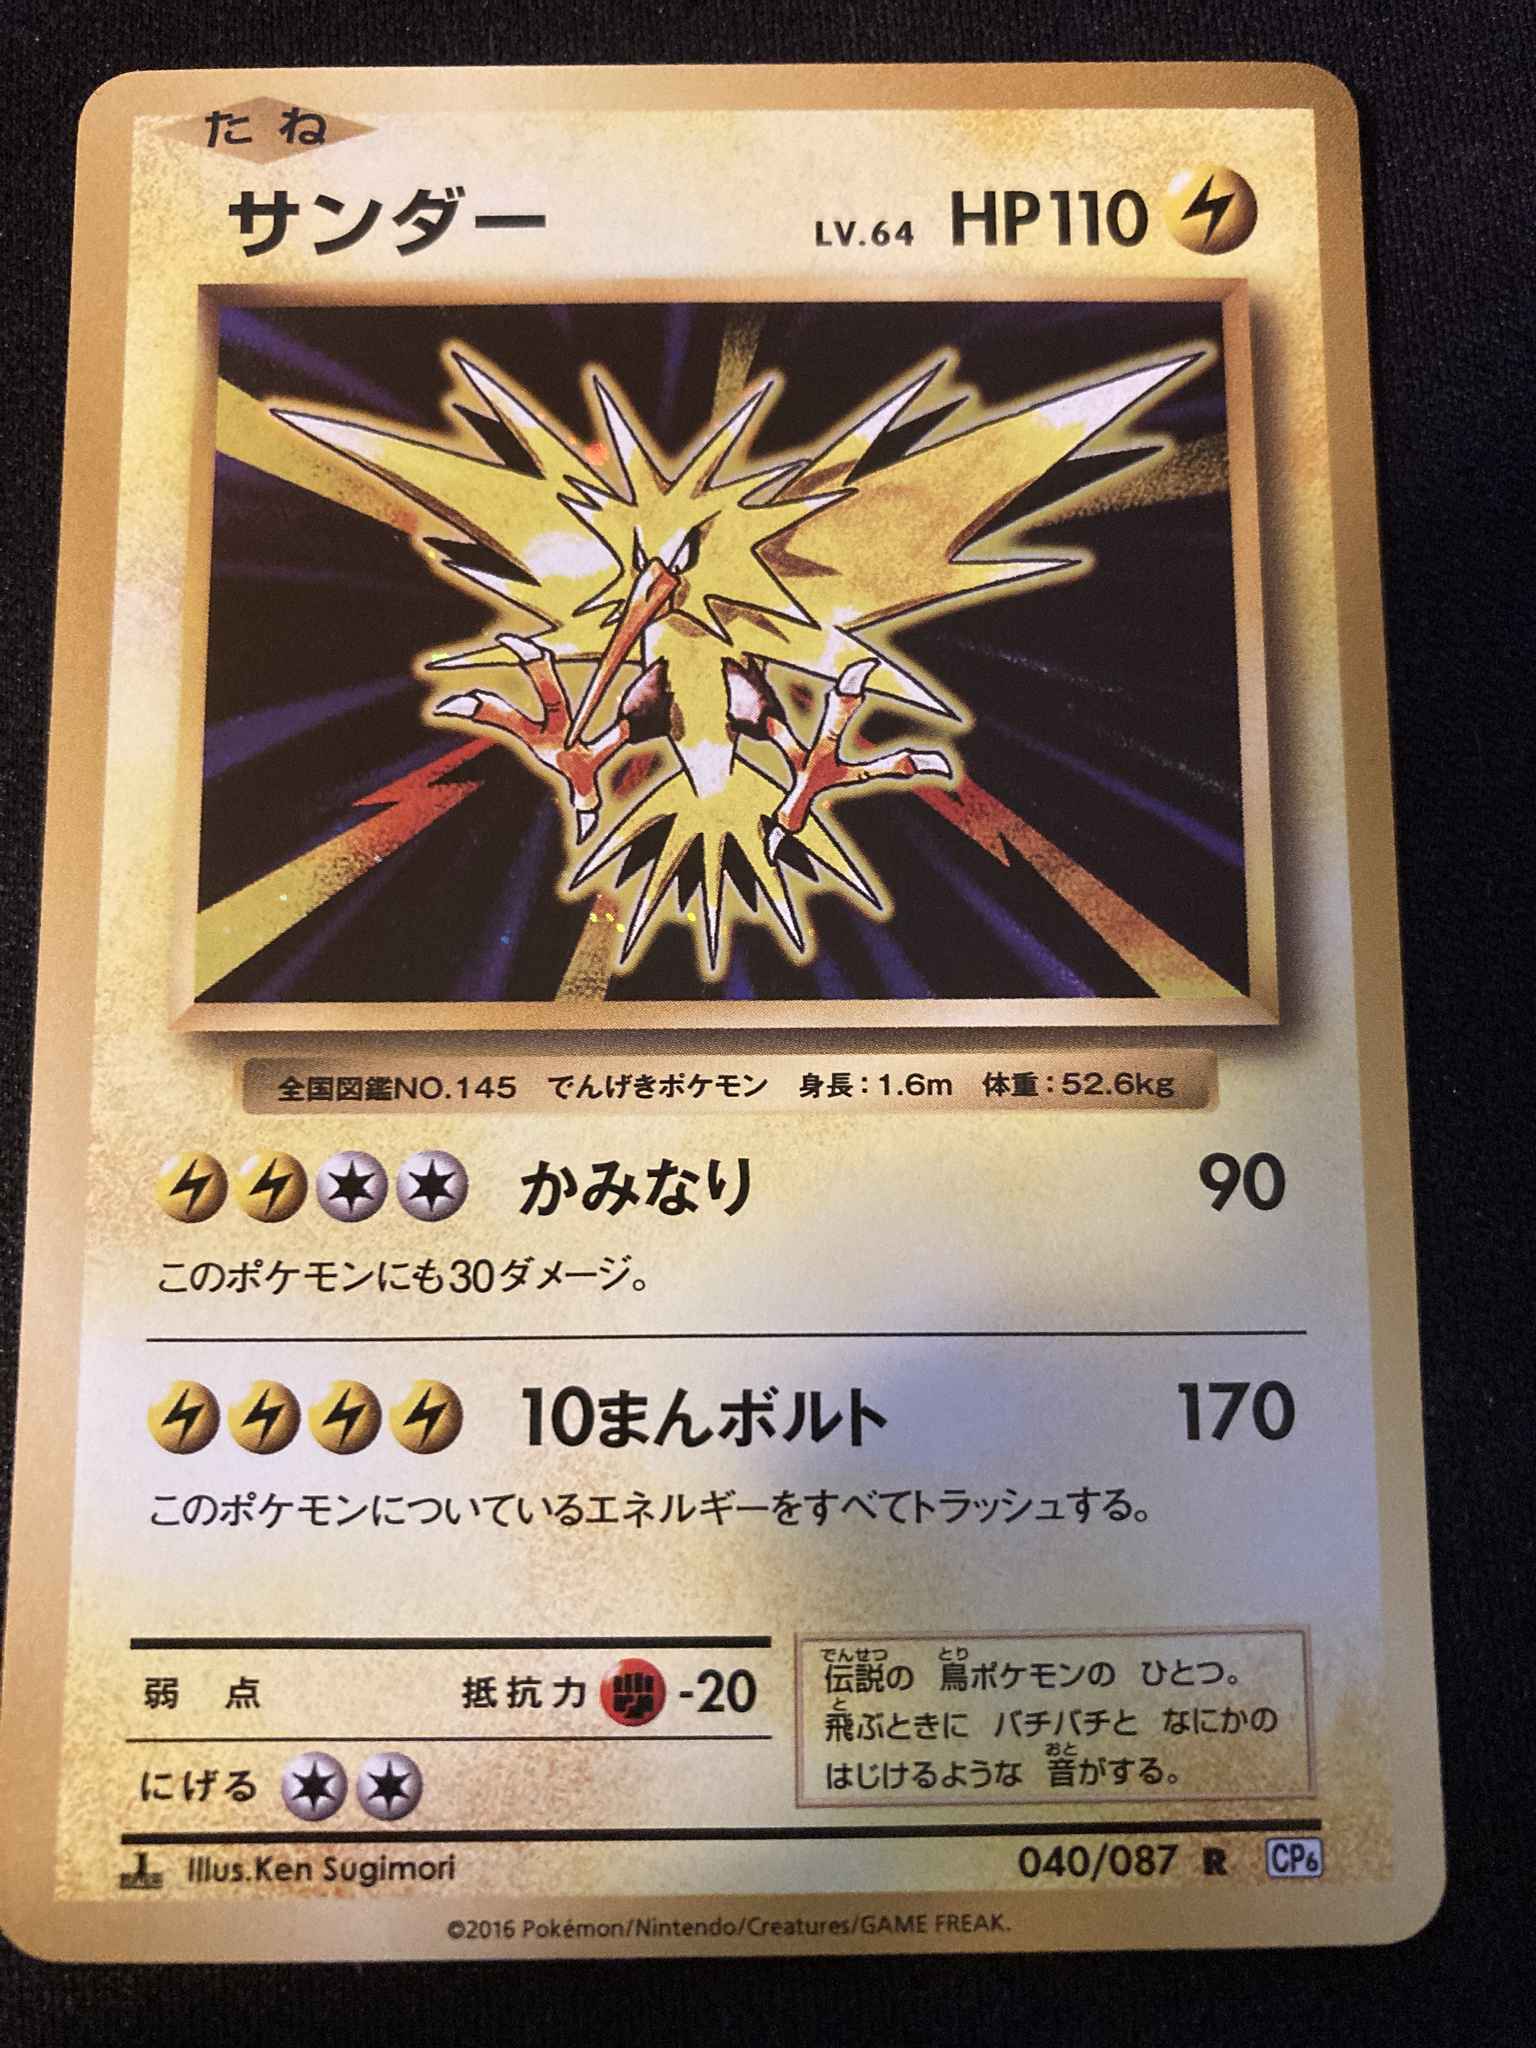 Zapdos Zapdos Xy Evolutions Pokemon Online Gaming Store For Cards Miniatures Singles Packs Booster Boxes